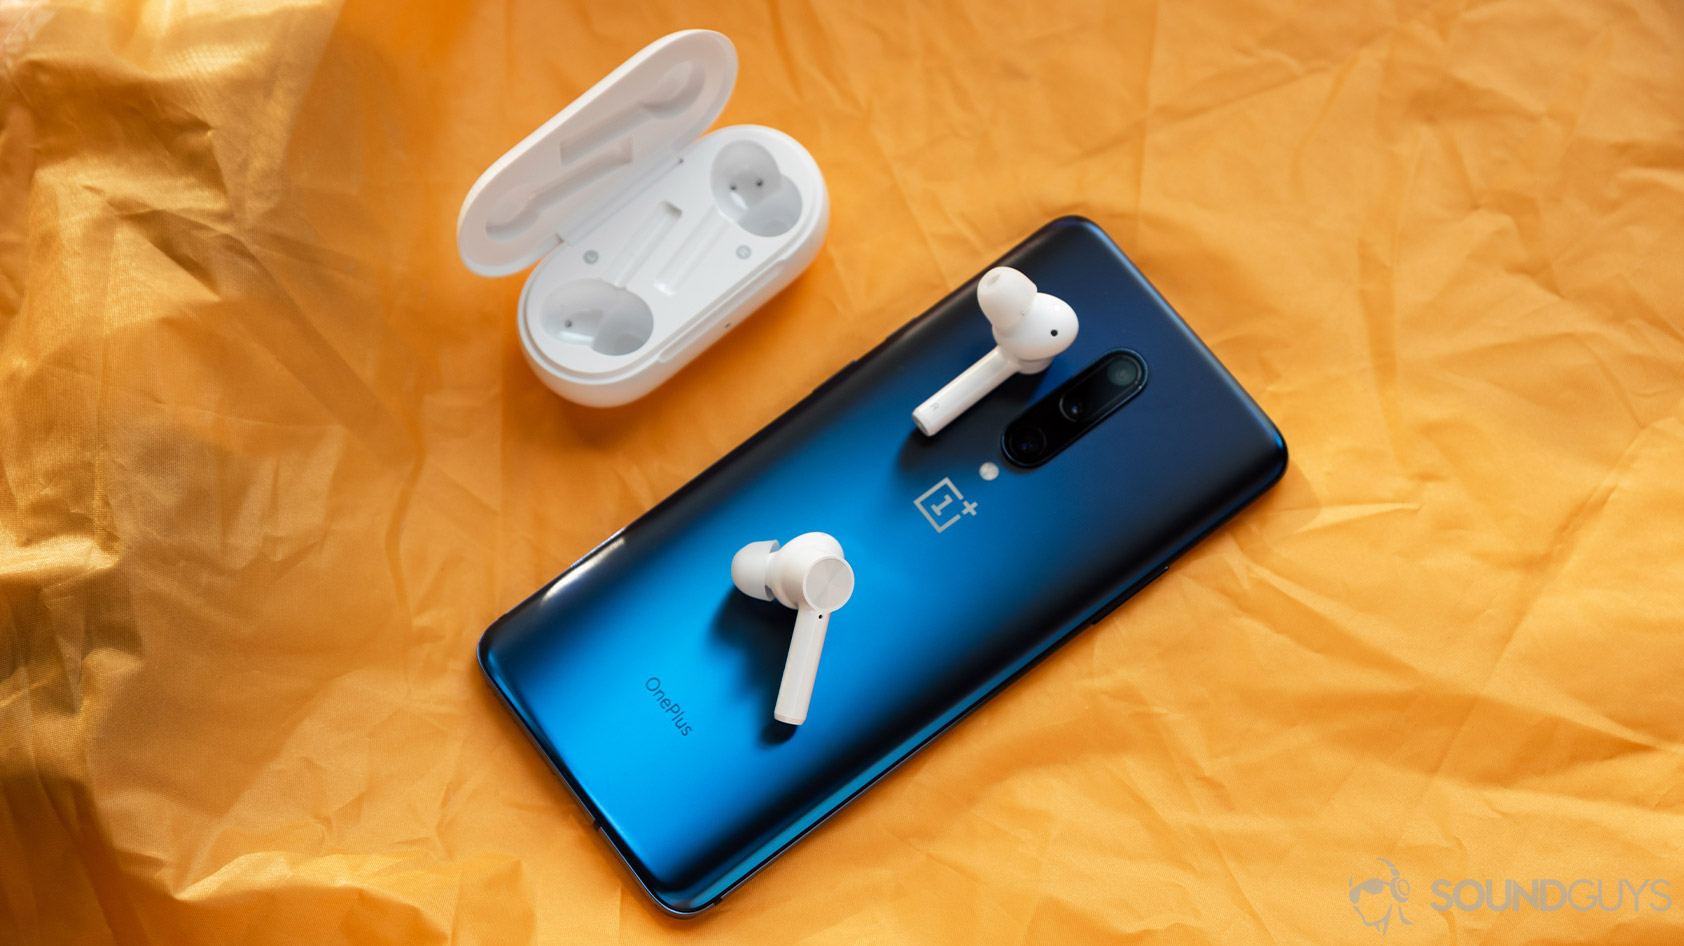 The OnePlus Buds Z cheap true wireless earbuds on top of a OnePlus 7 Pro smartphone in blue, with the open charging case off to the top left.